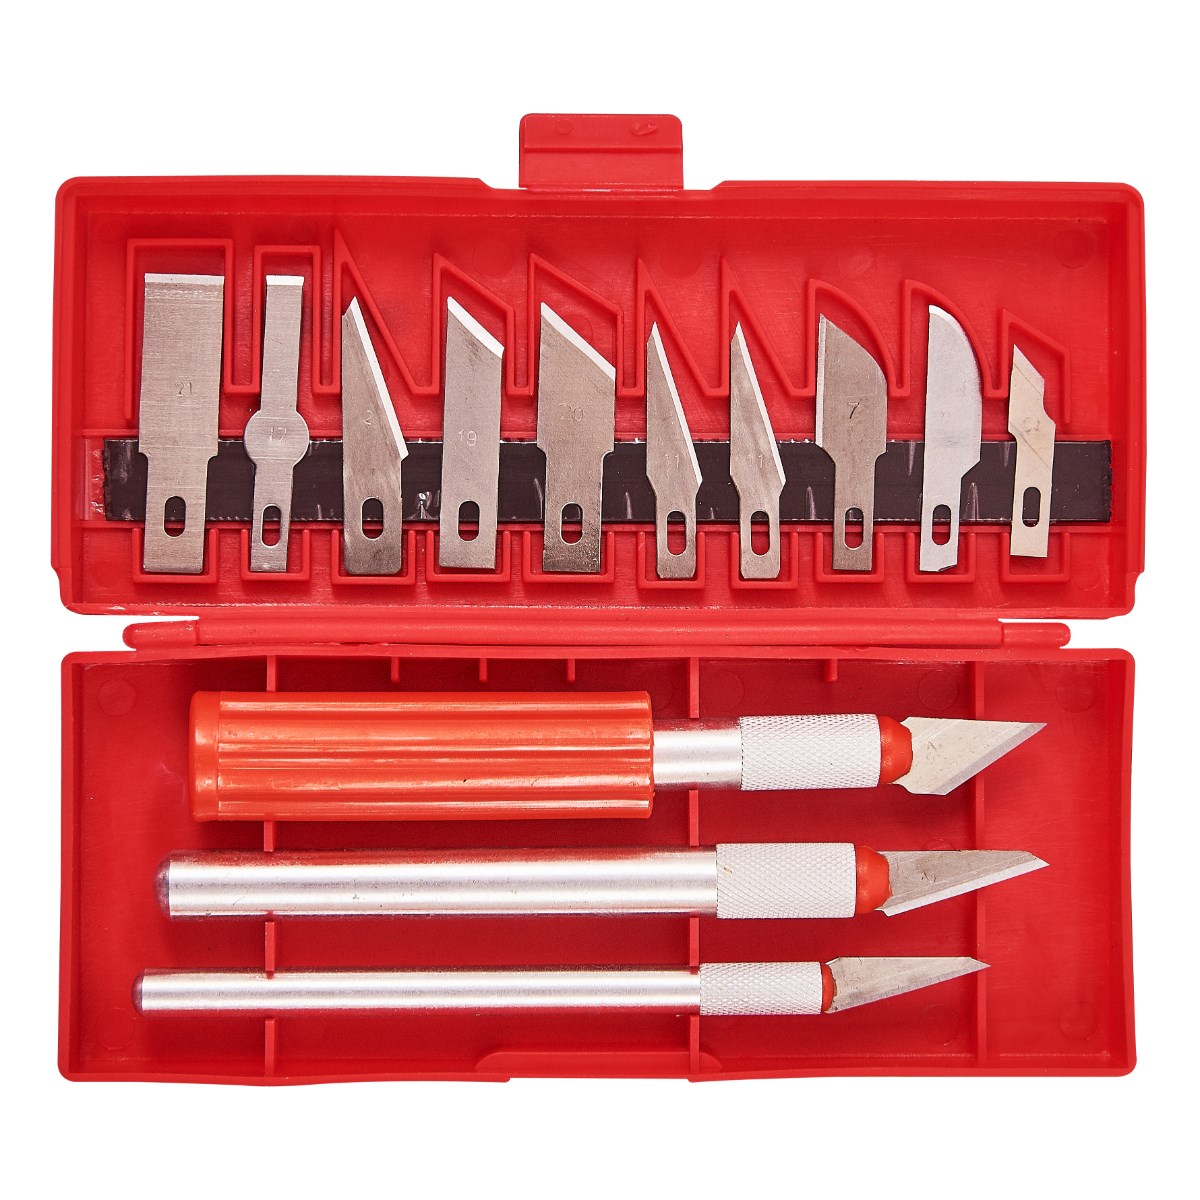 General Precision Hobby Knife Set, 13-Piece - Midwest Technology Products